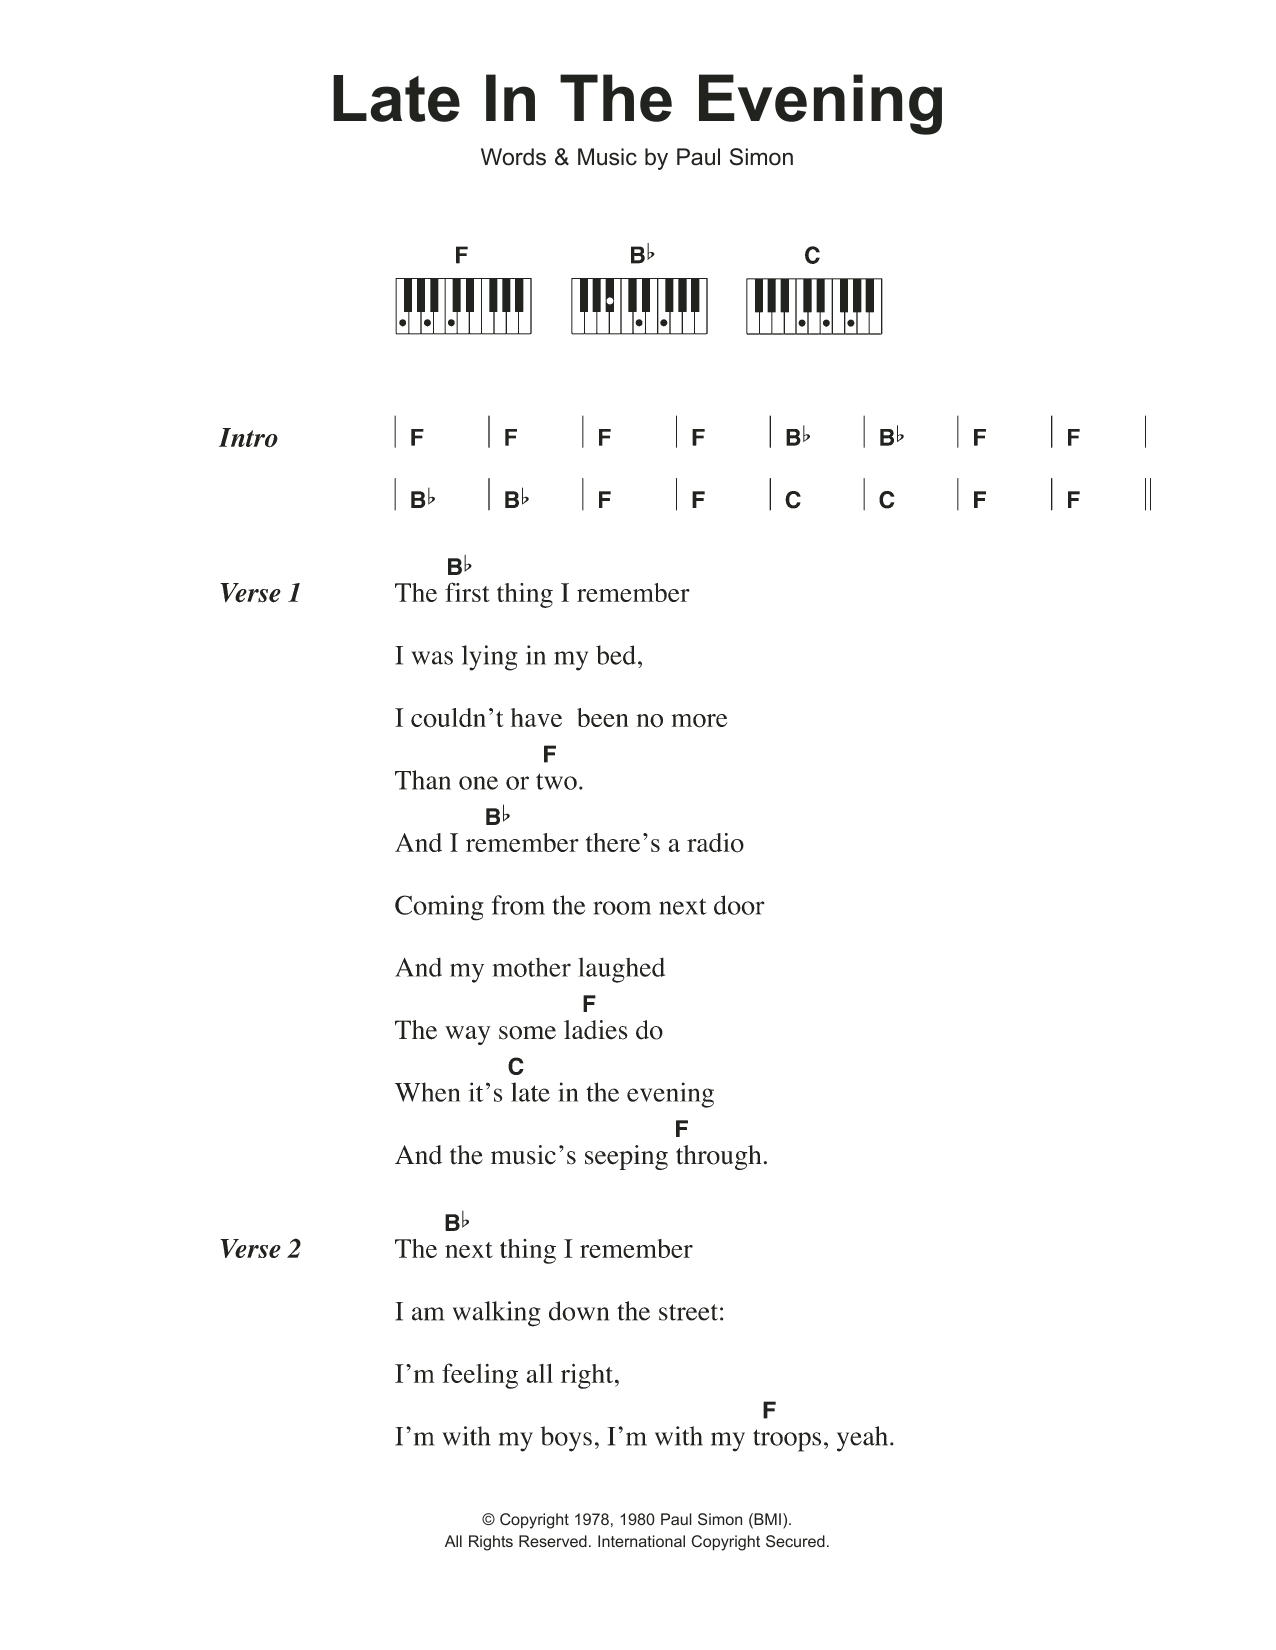 Download Paul Simon Late In The Evening Sheet Music